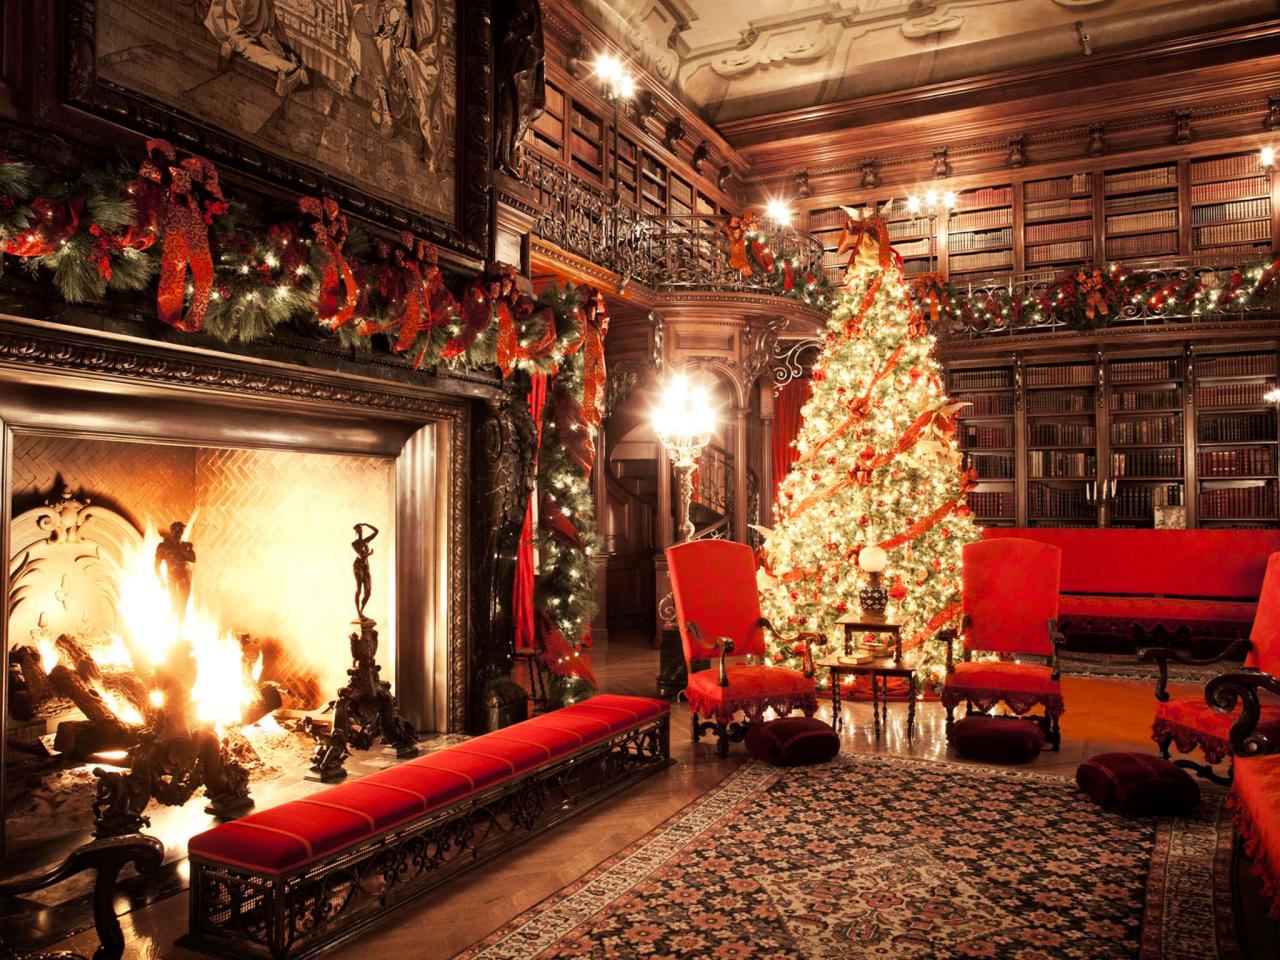 Biltmore Estate Library House With Christmas Tree And